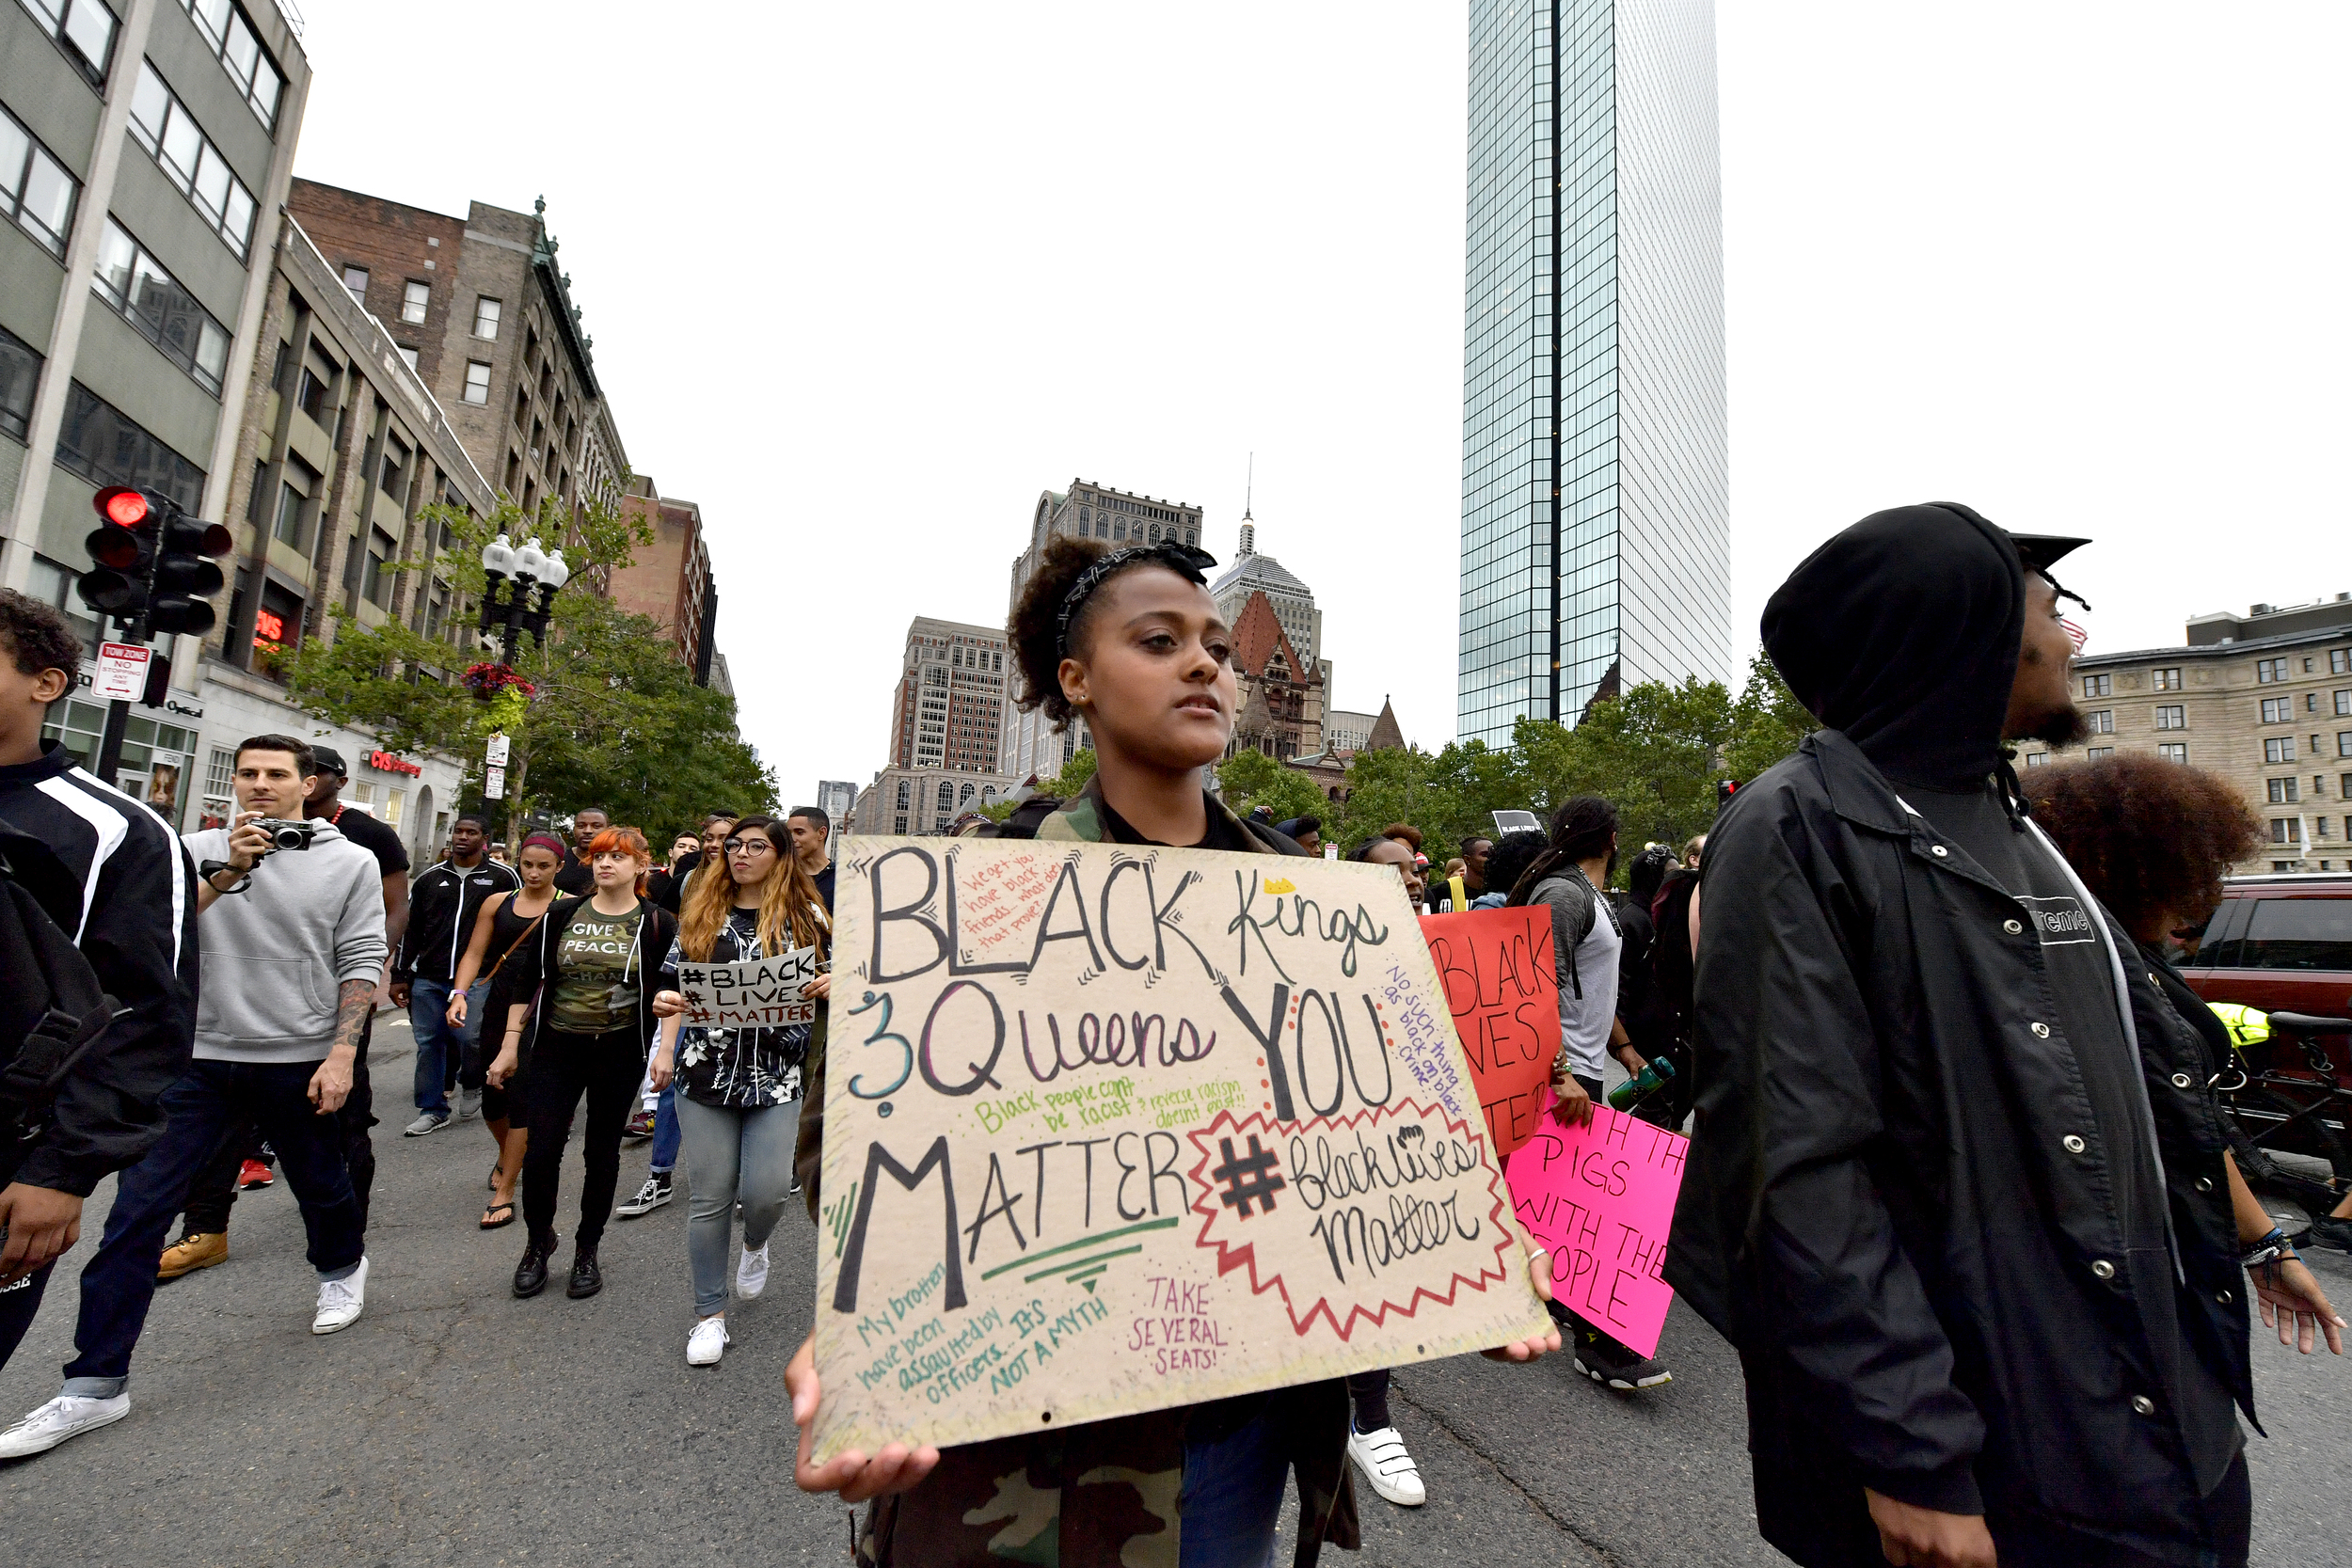  BOSTON, MA, July 10, 2016: Several hundred Black Lives Matter protestors gathered to march in downtown Boston from Downtown Crossing to Dudley Square on July 10, 2016. Boston Police guided them through the streets of Boston and the protest took plac